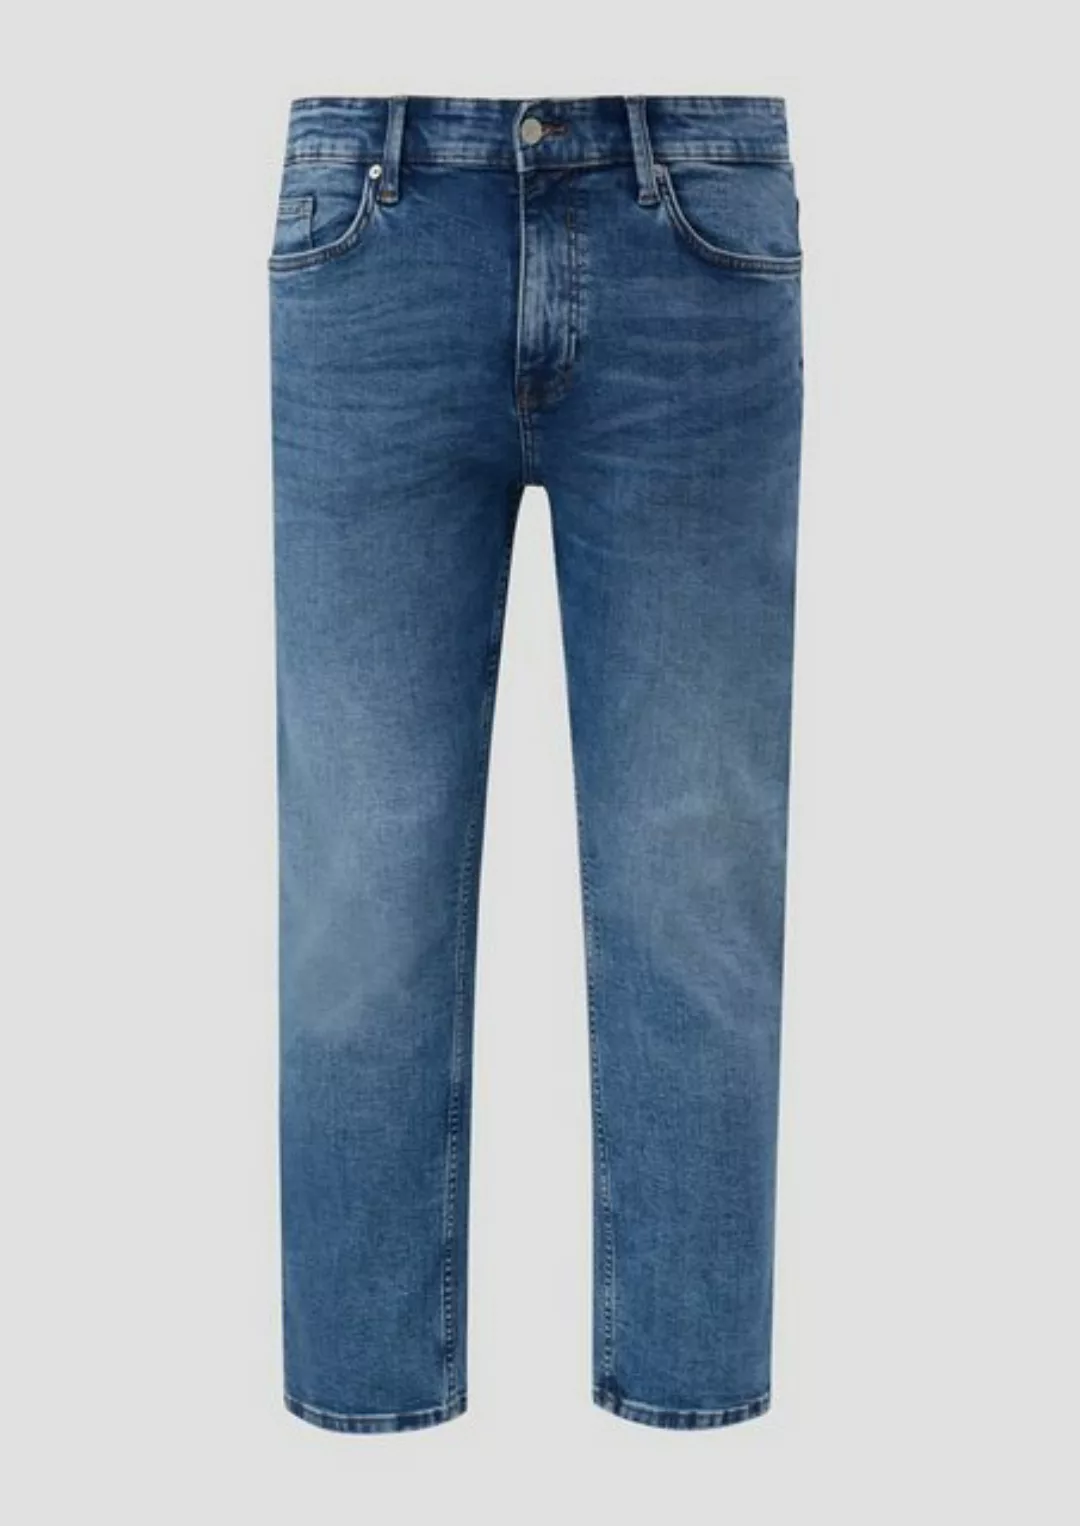 s.Oliver Stoffhose Jeans Casby / Relaxed Fit / Mid Rise / Straight Leg Wasc günstig online kaufen